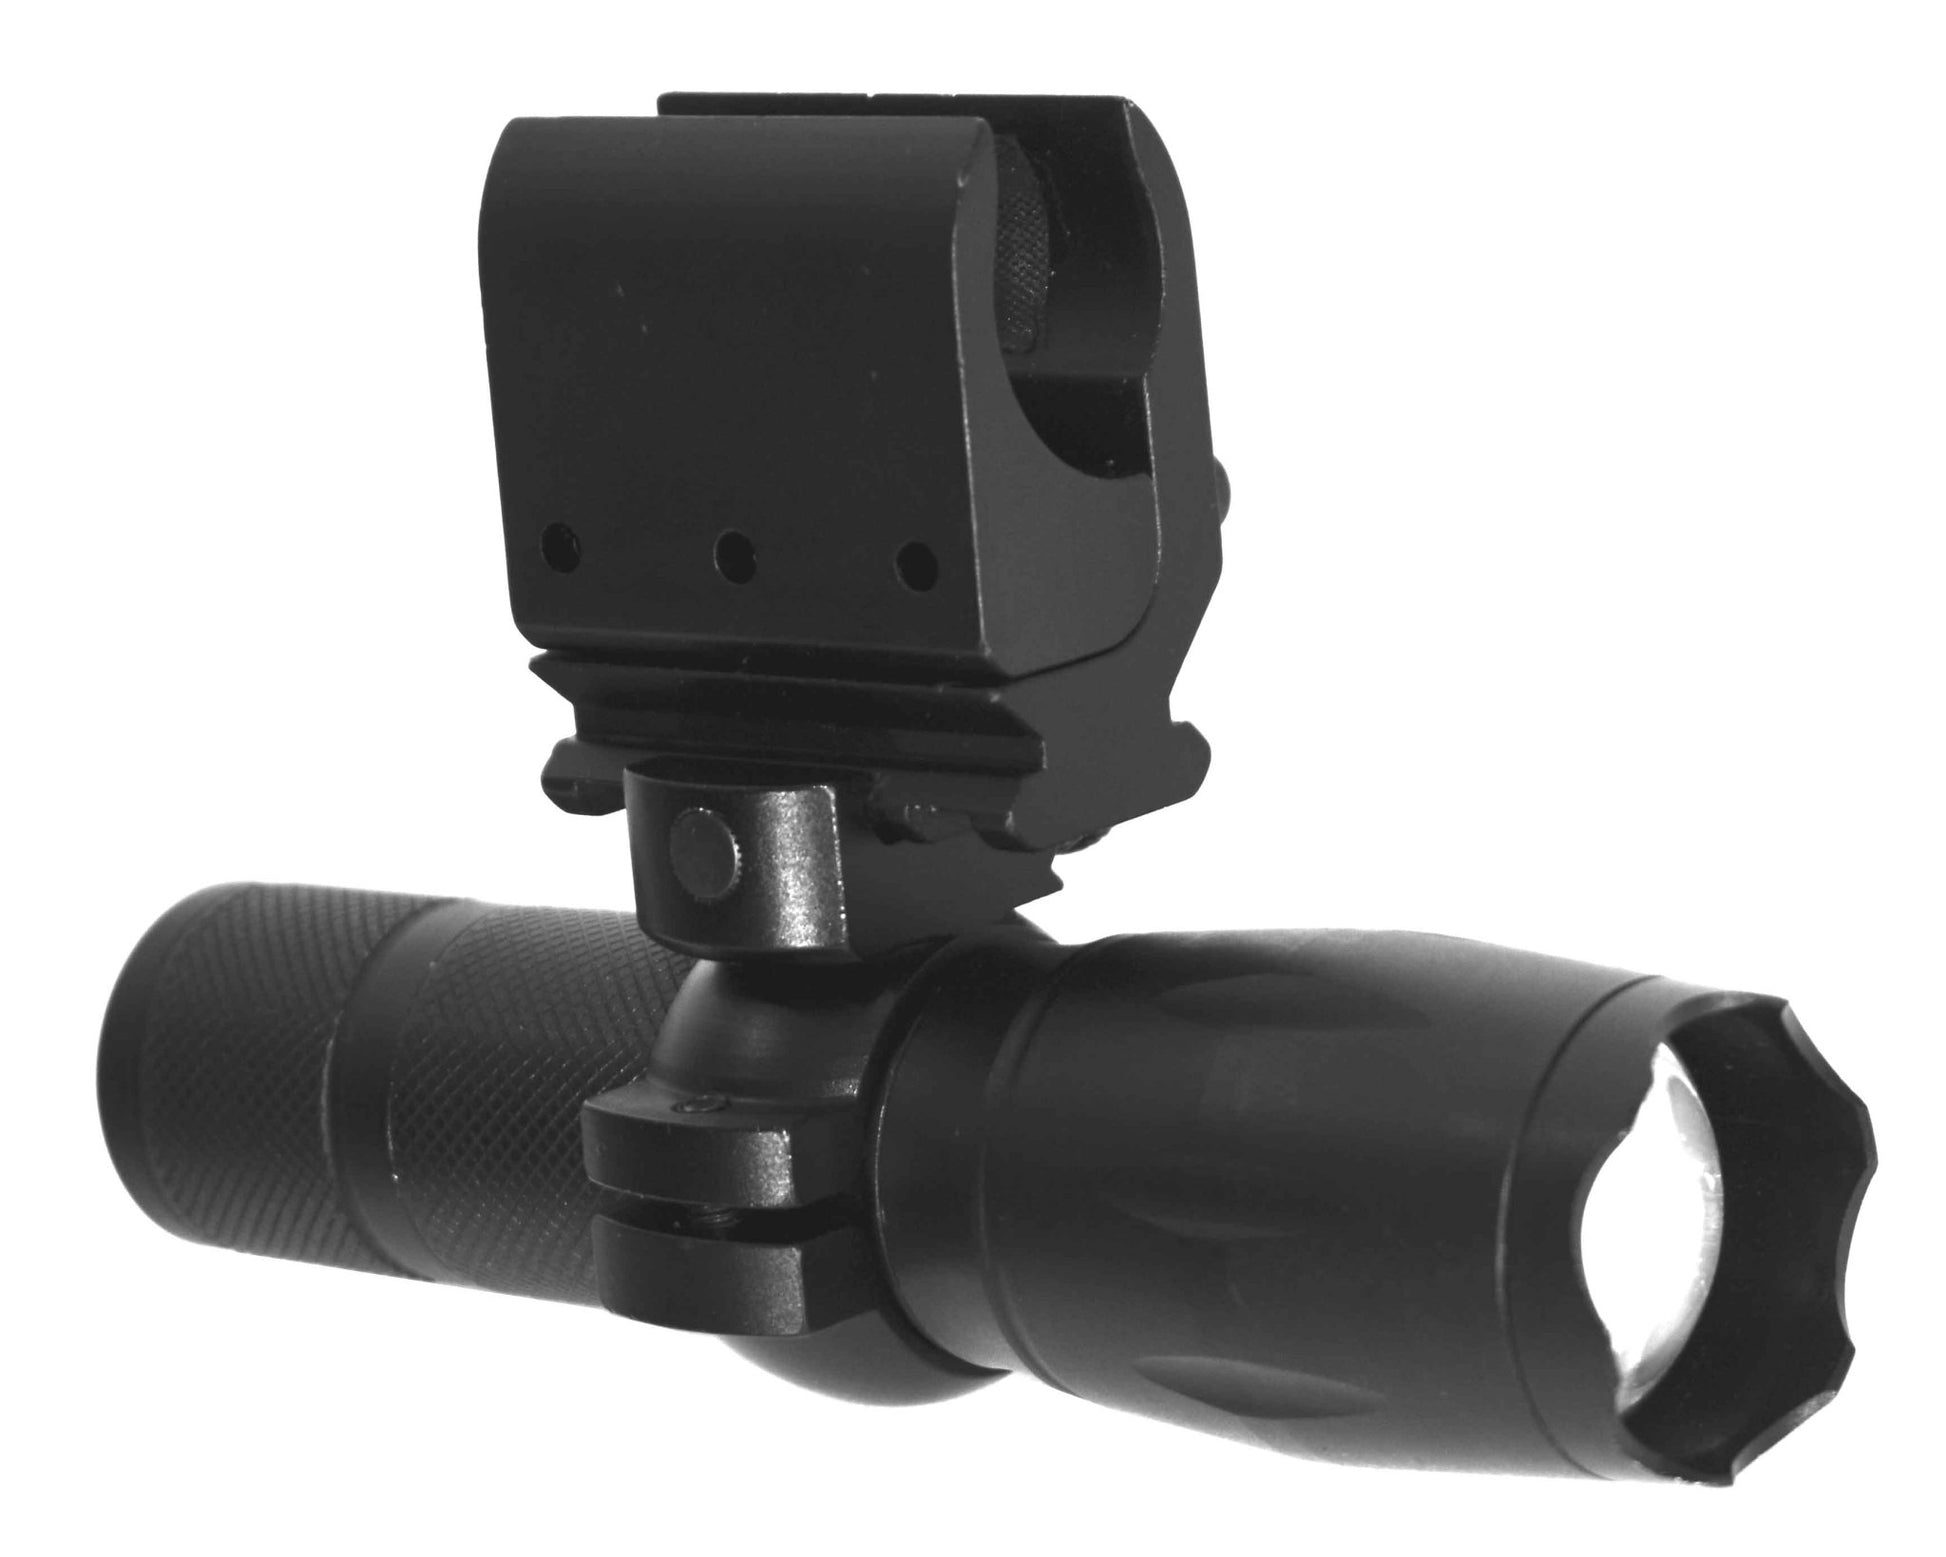 Tactical flashlight 1000 lumen with magazine tube mount compatible with 20 gauge pumps. - TRINITY SUPPLY INC